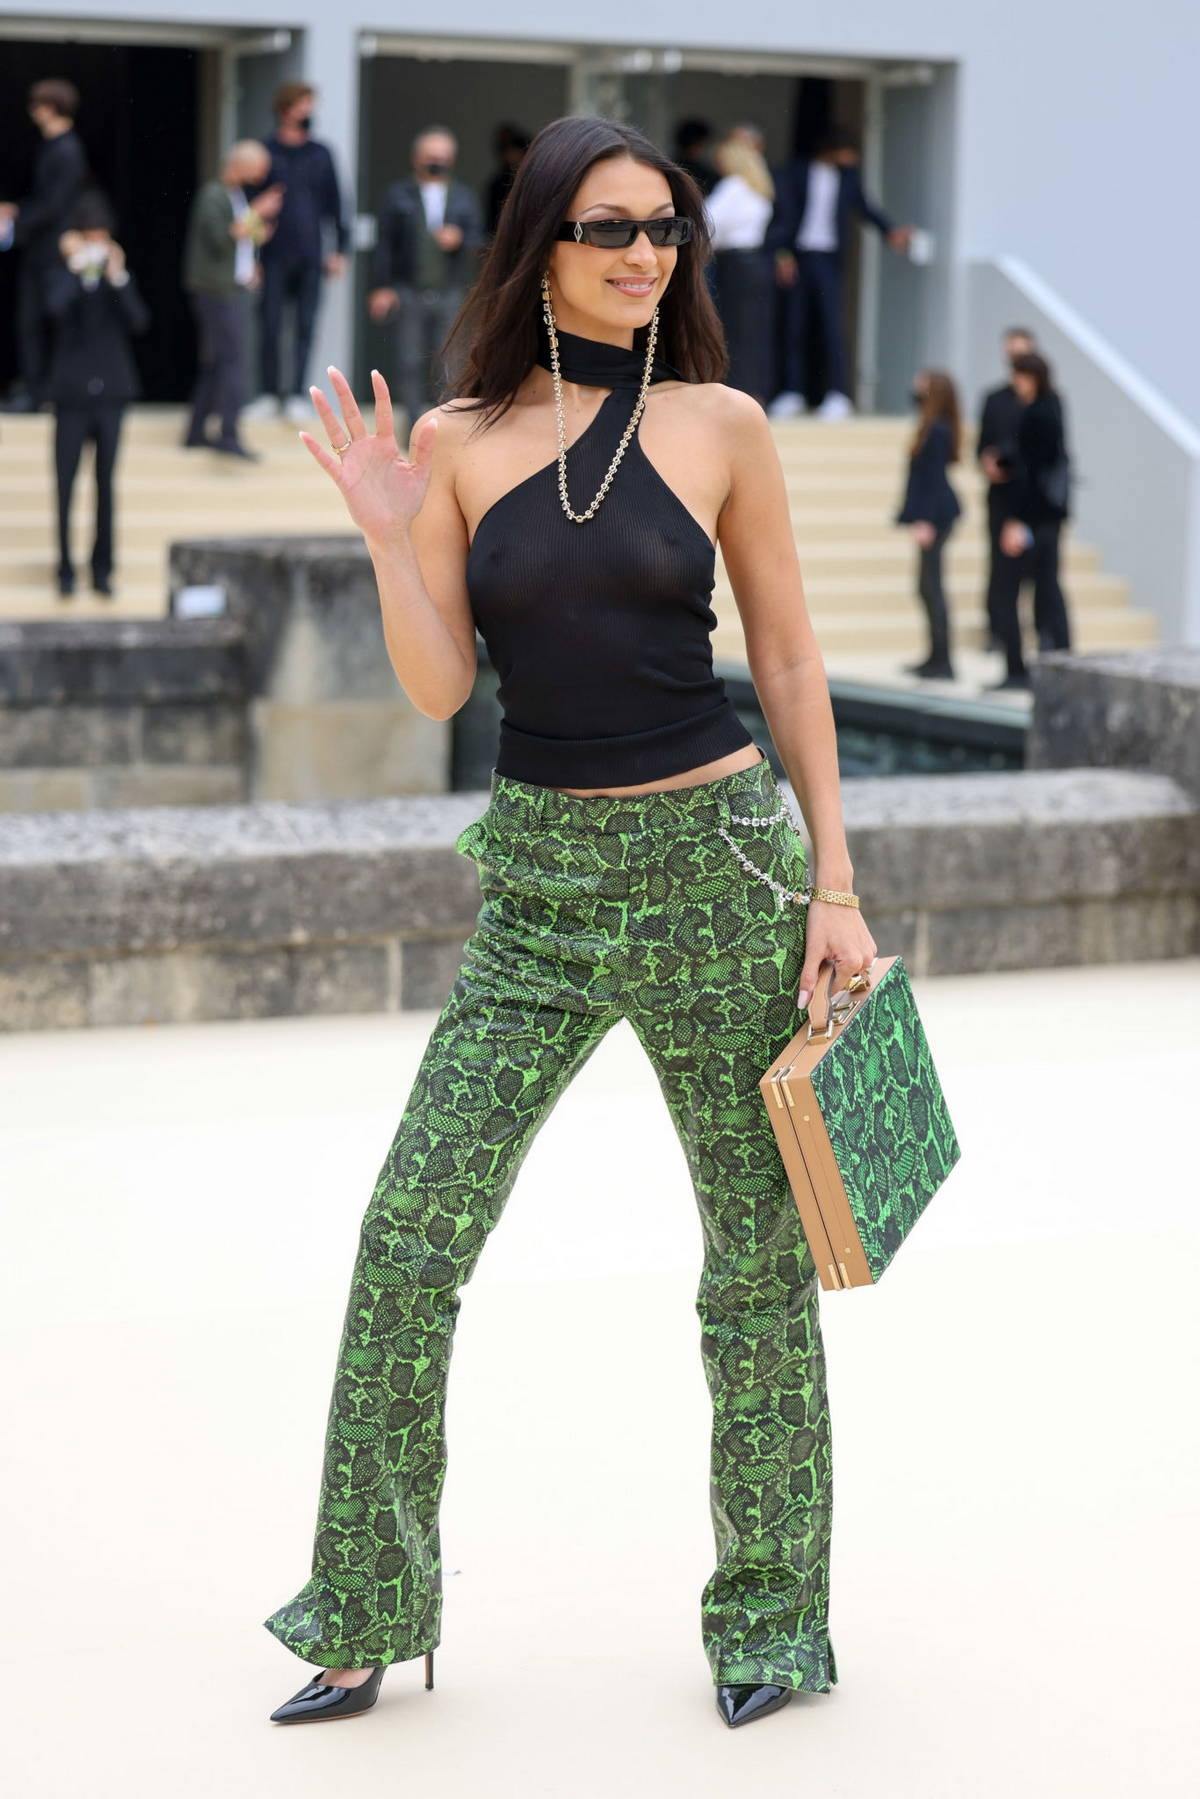 Bella Hadid attends the Dior Homme Menswear Spring-Summer 2022 show in Paris, France